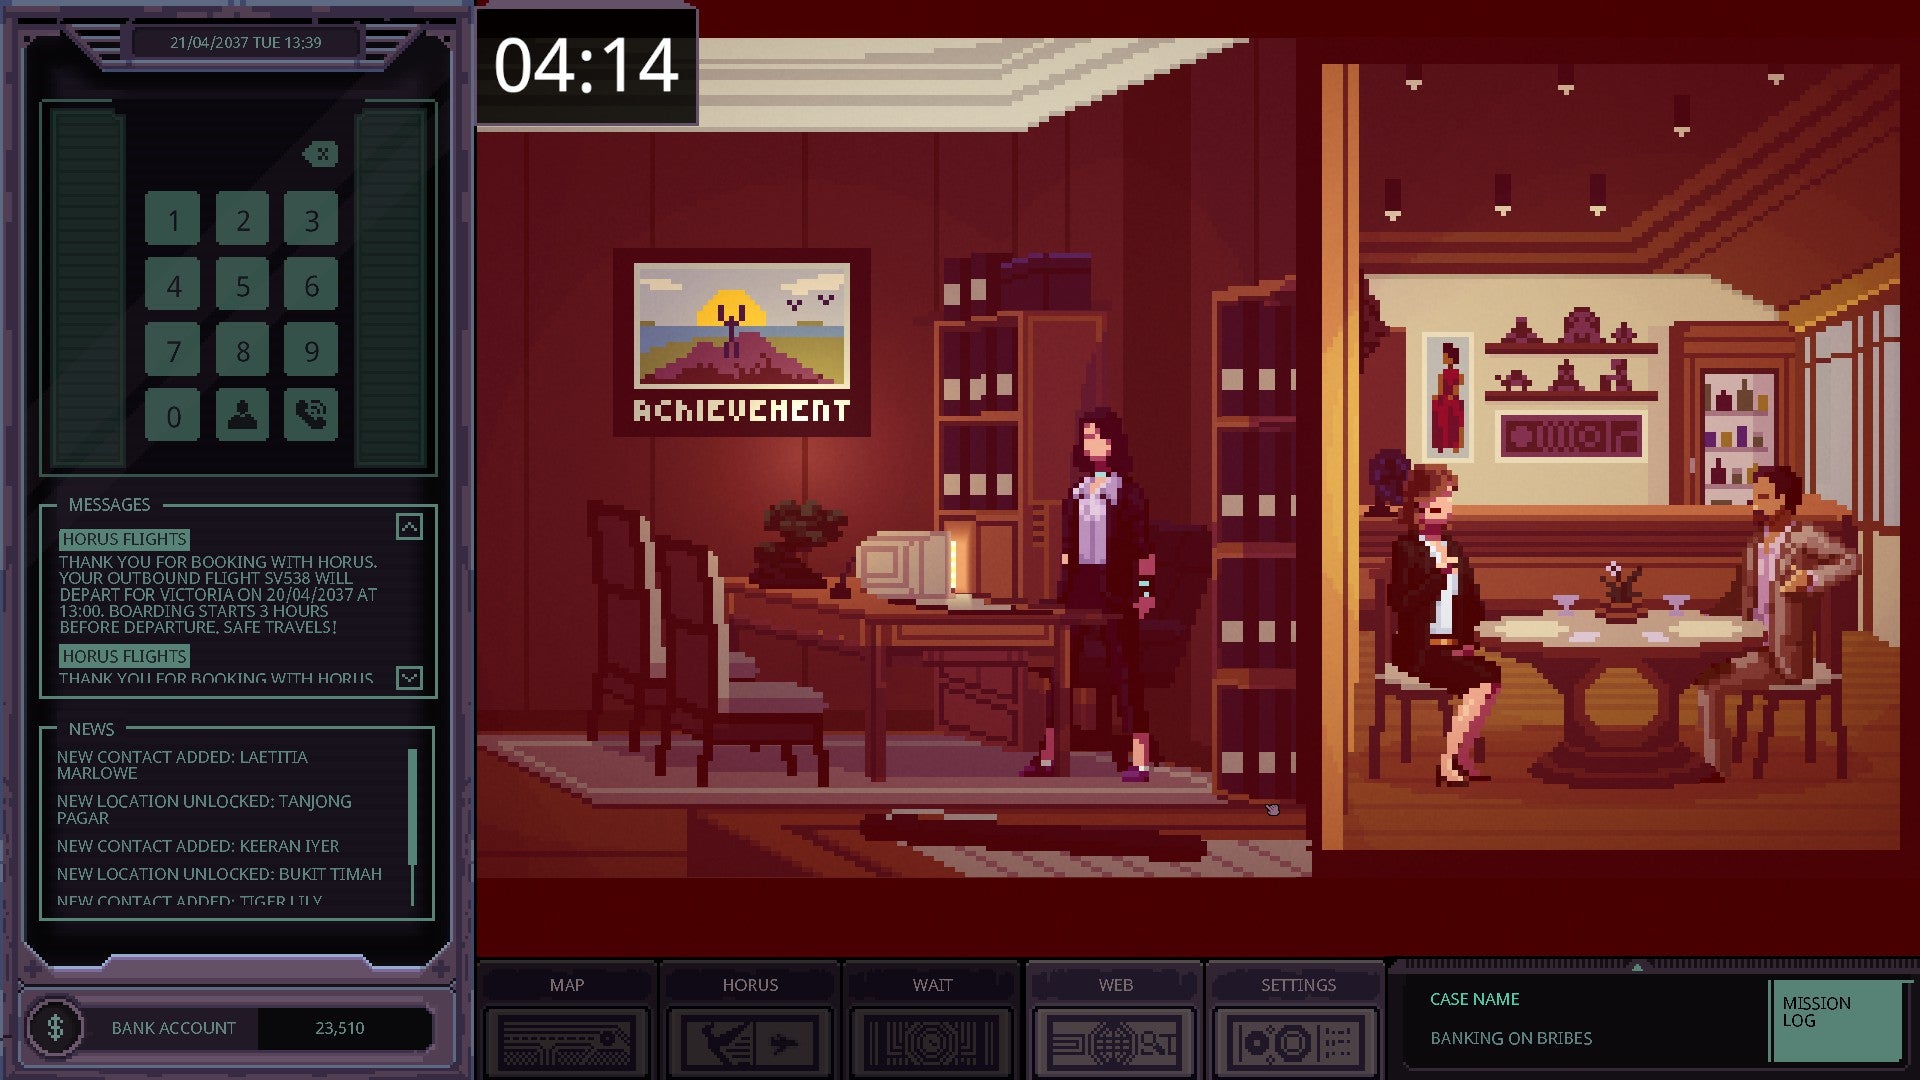 Chinatown Detective Agency review screenshots depicting the game's left-aligned UI overlay, central window pane of pixel-art, cyber-noir vistas, and snapshots of detective dialogue.